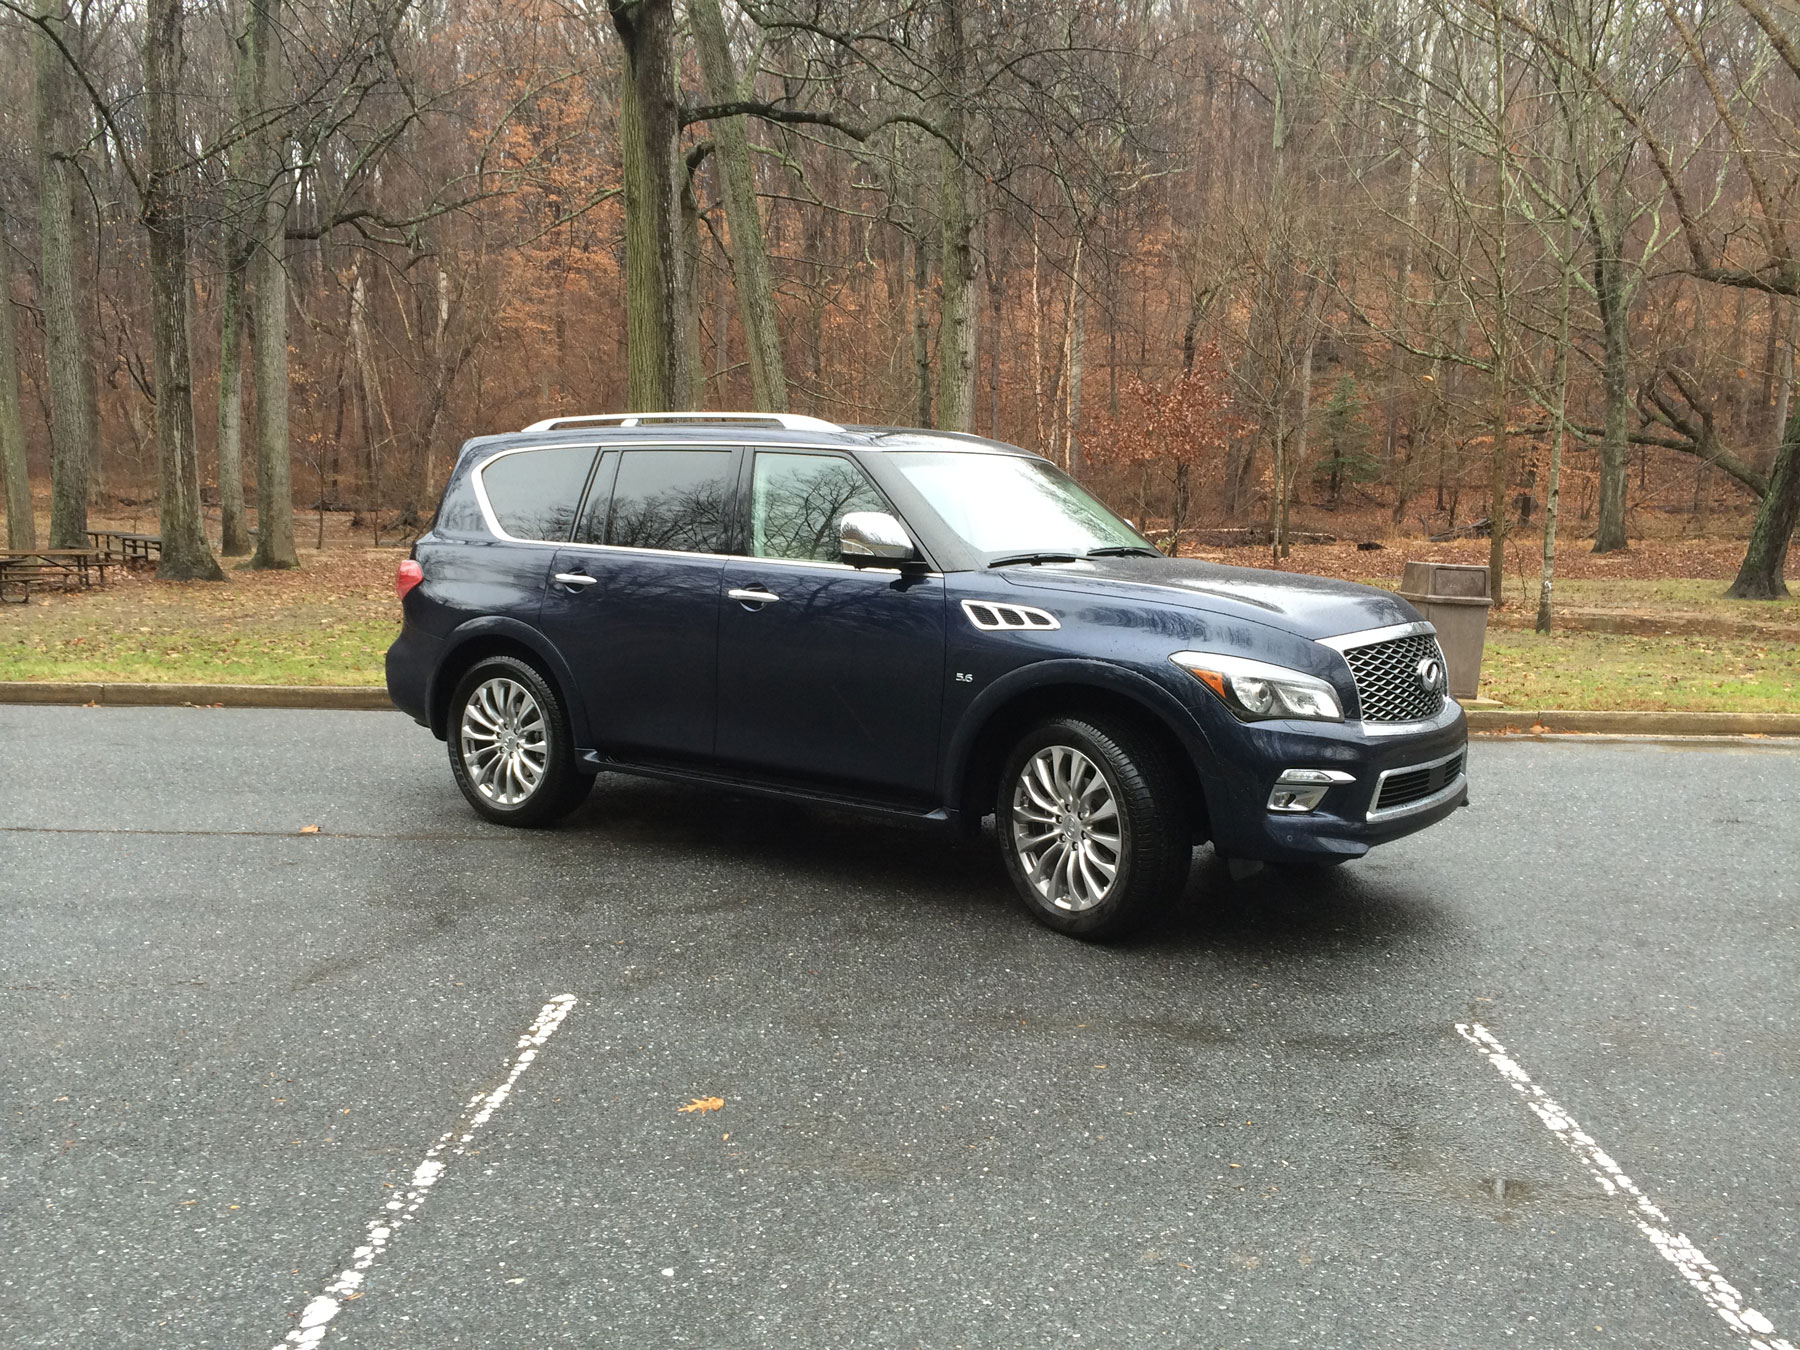 2015 Infiniti QX80: A large luxury SUV with plenty of high-tech safety features